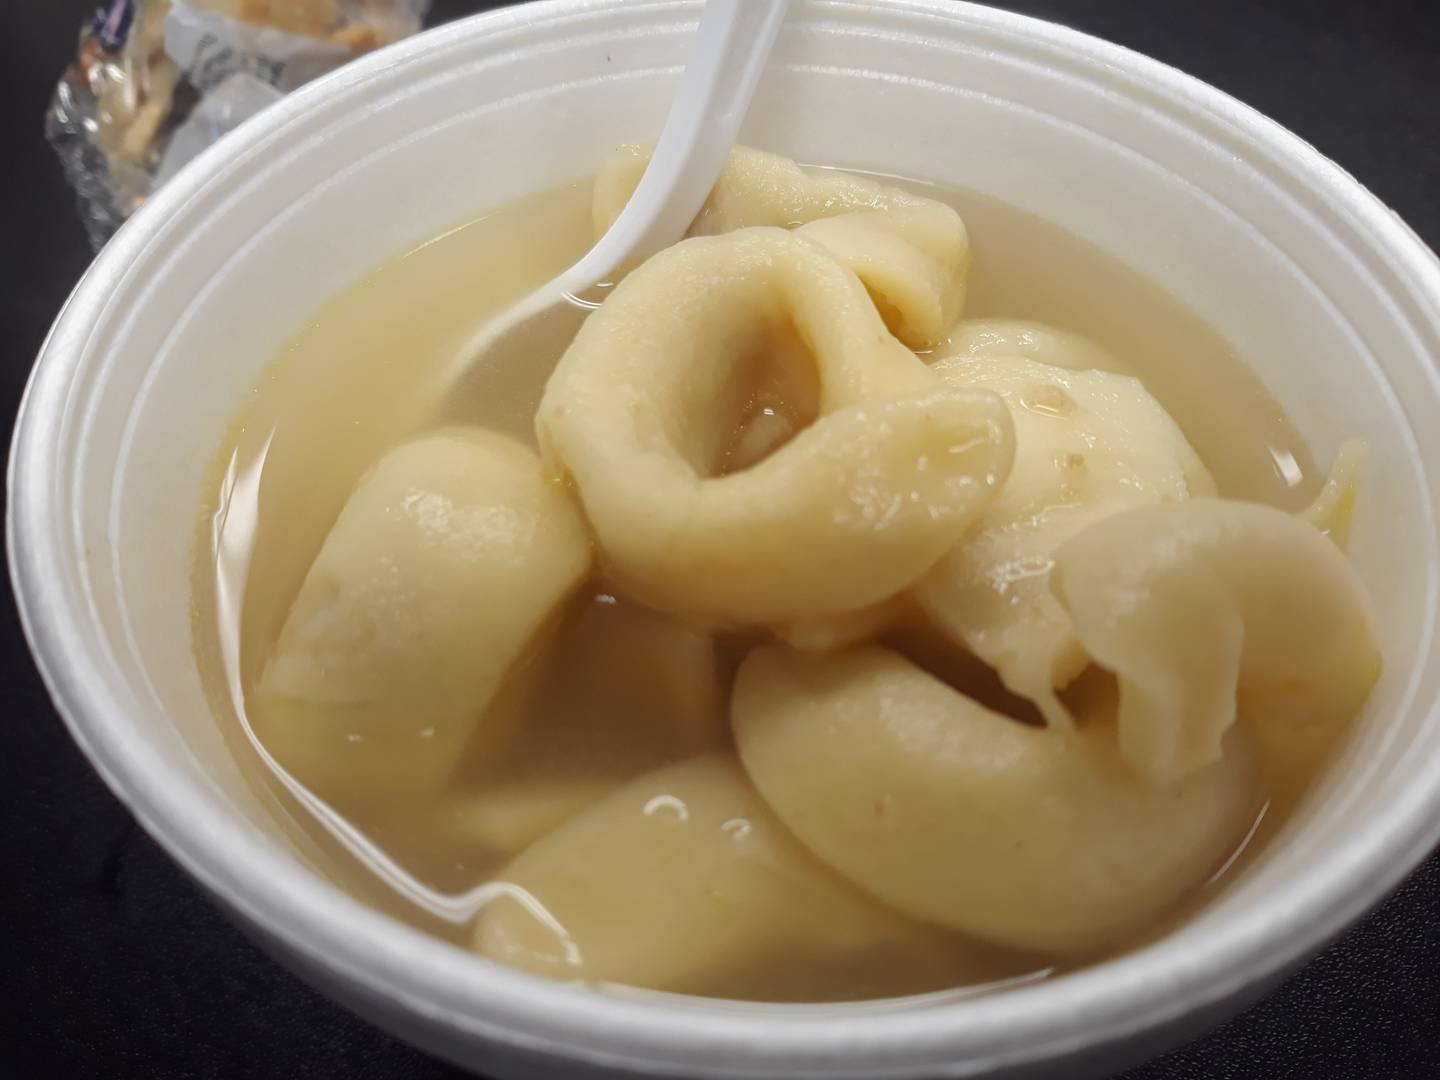 Ravs and broth are an Illinois Valley classic, and John's serves them hot and al dente.